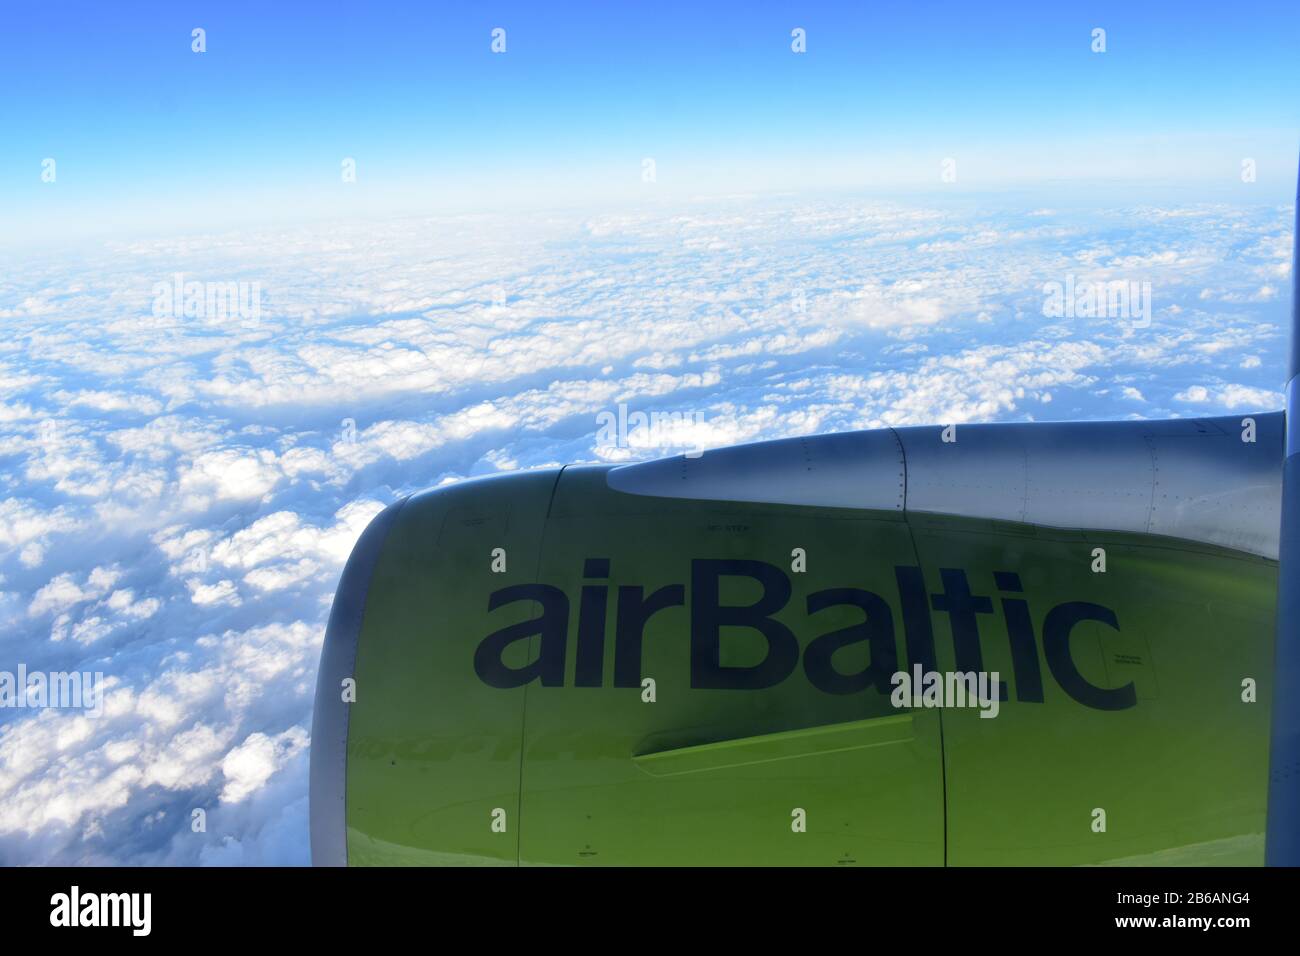 Riga, Latvia - April 22, 2019: View from plane window on turbine. Airbaltic airplane flying over the clouds Stock Photo